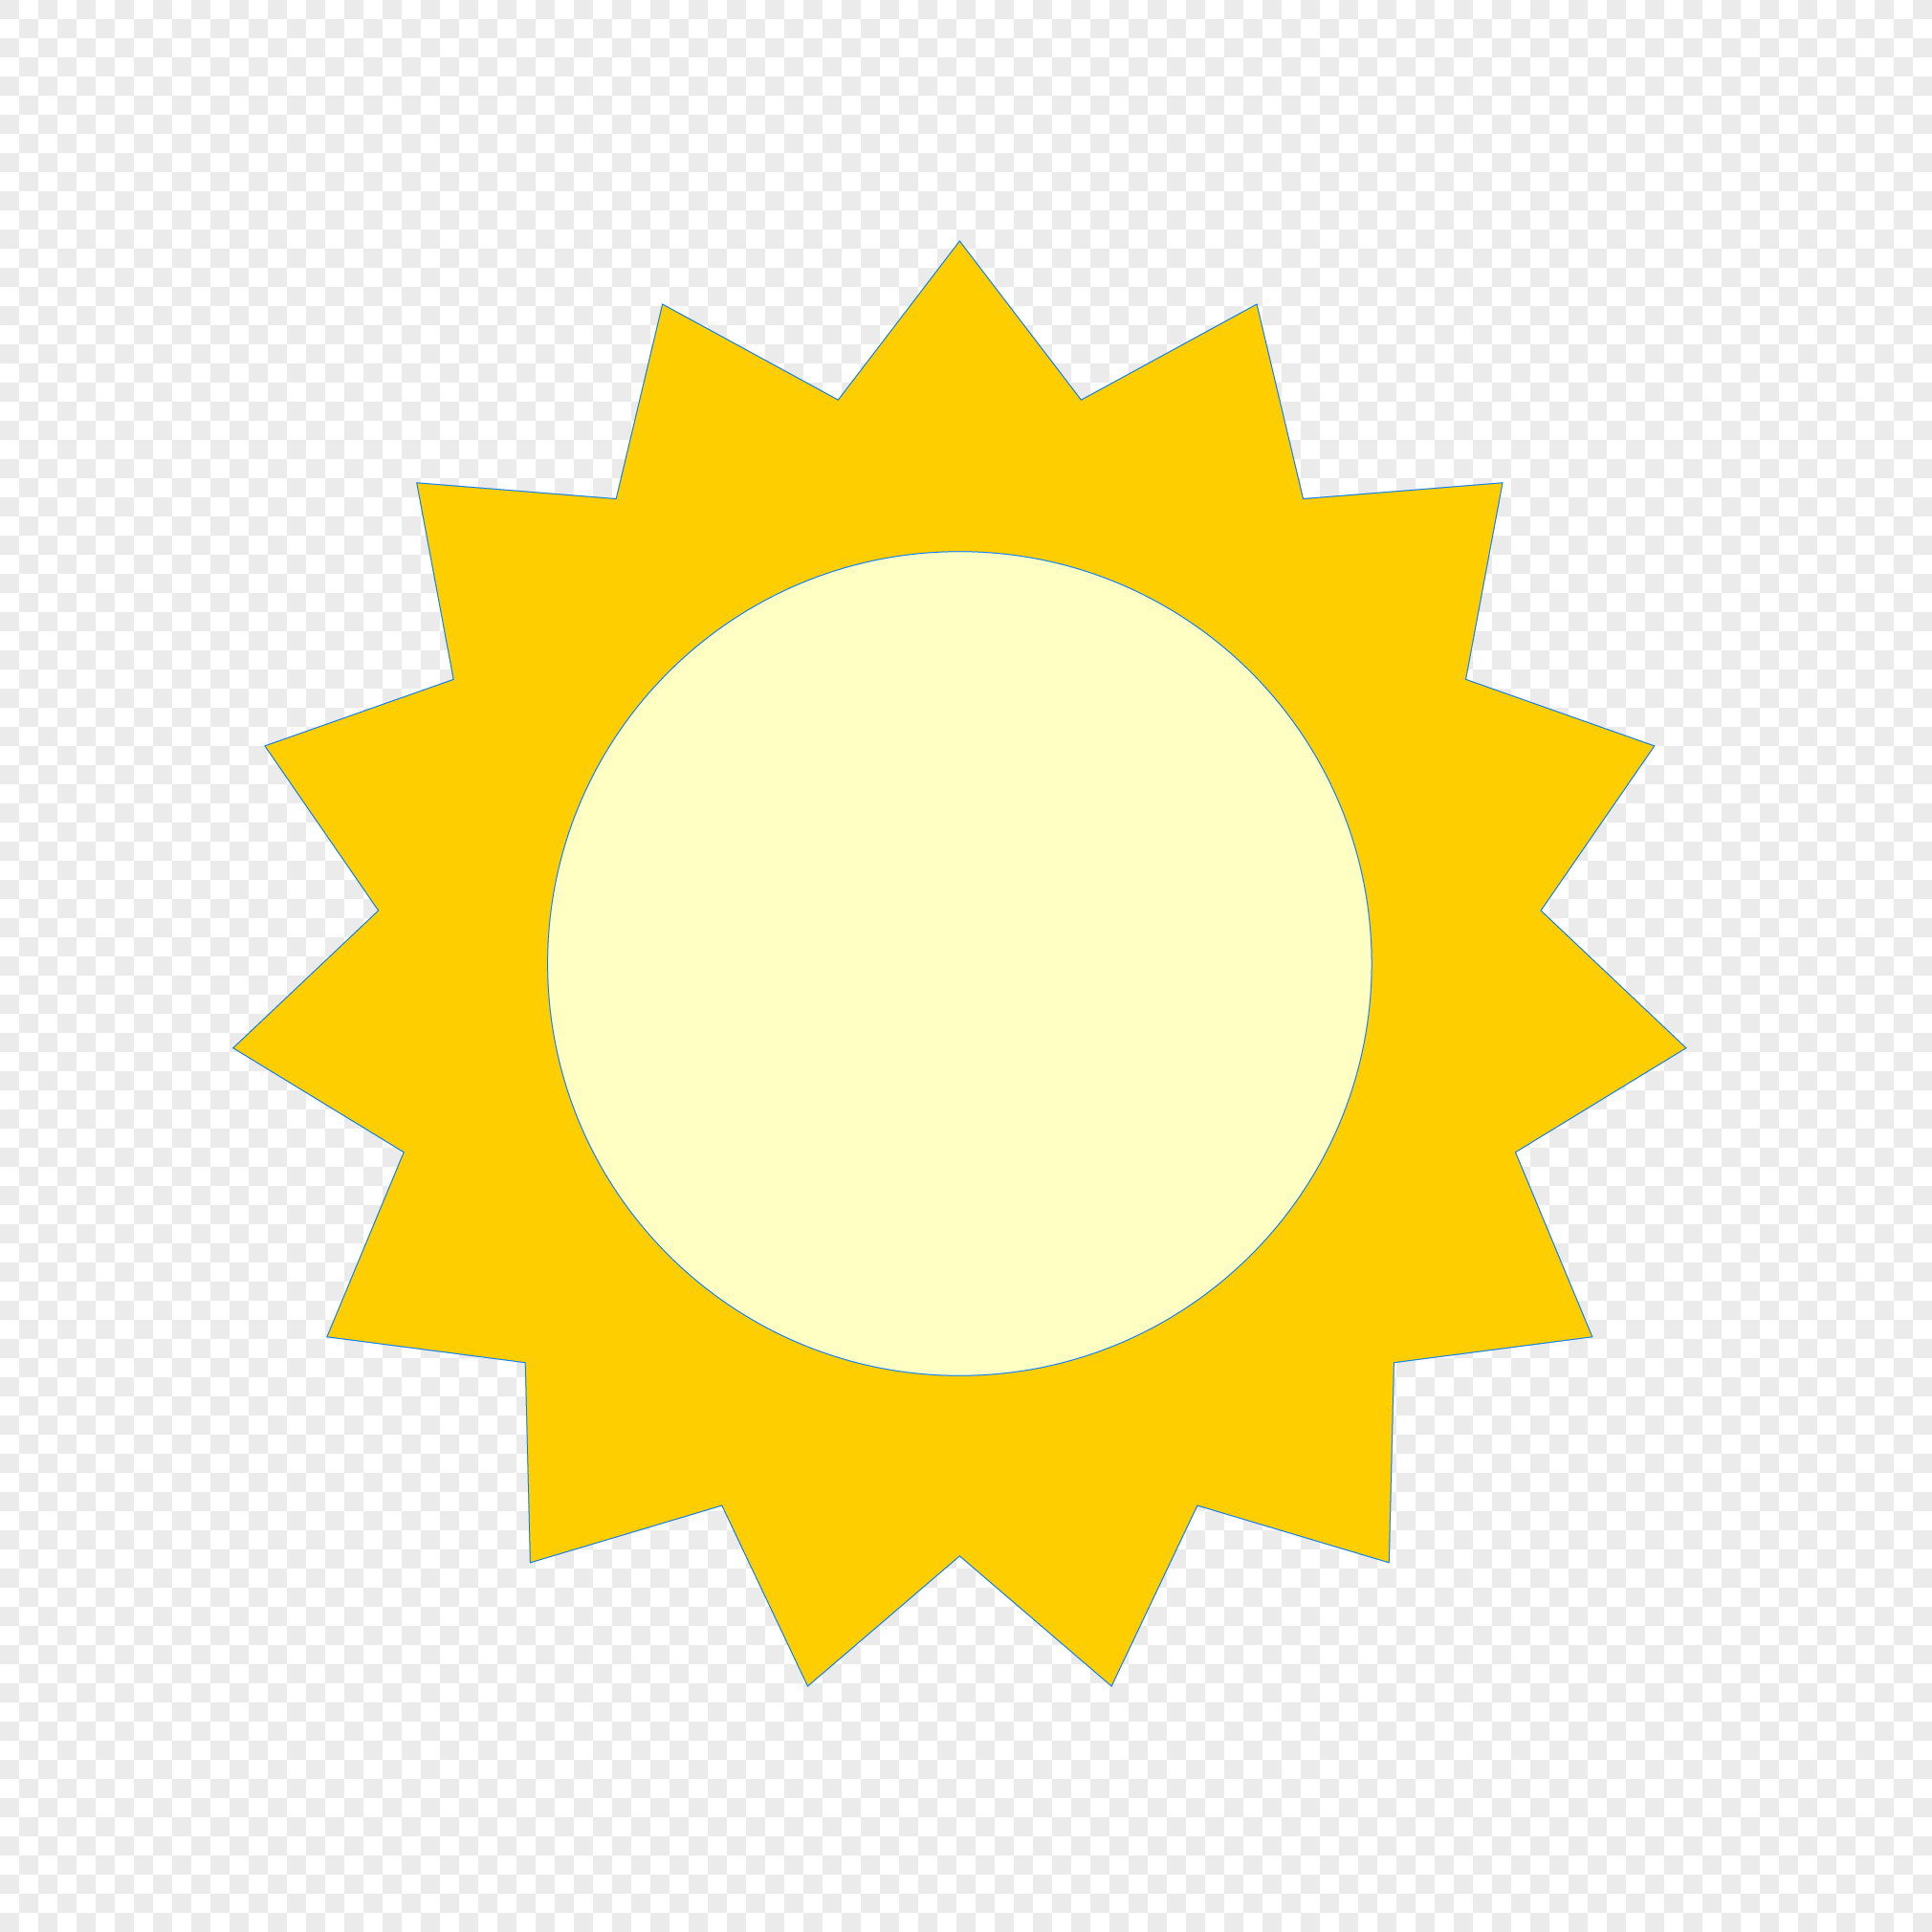 Painted Sun Logo - Cartoon hand painted sun png image_picture free download